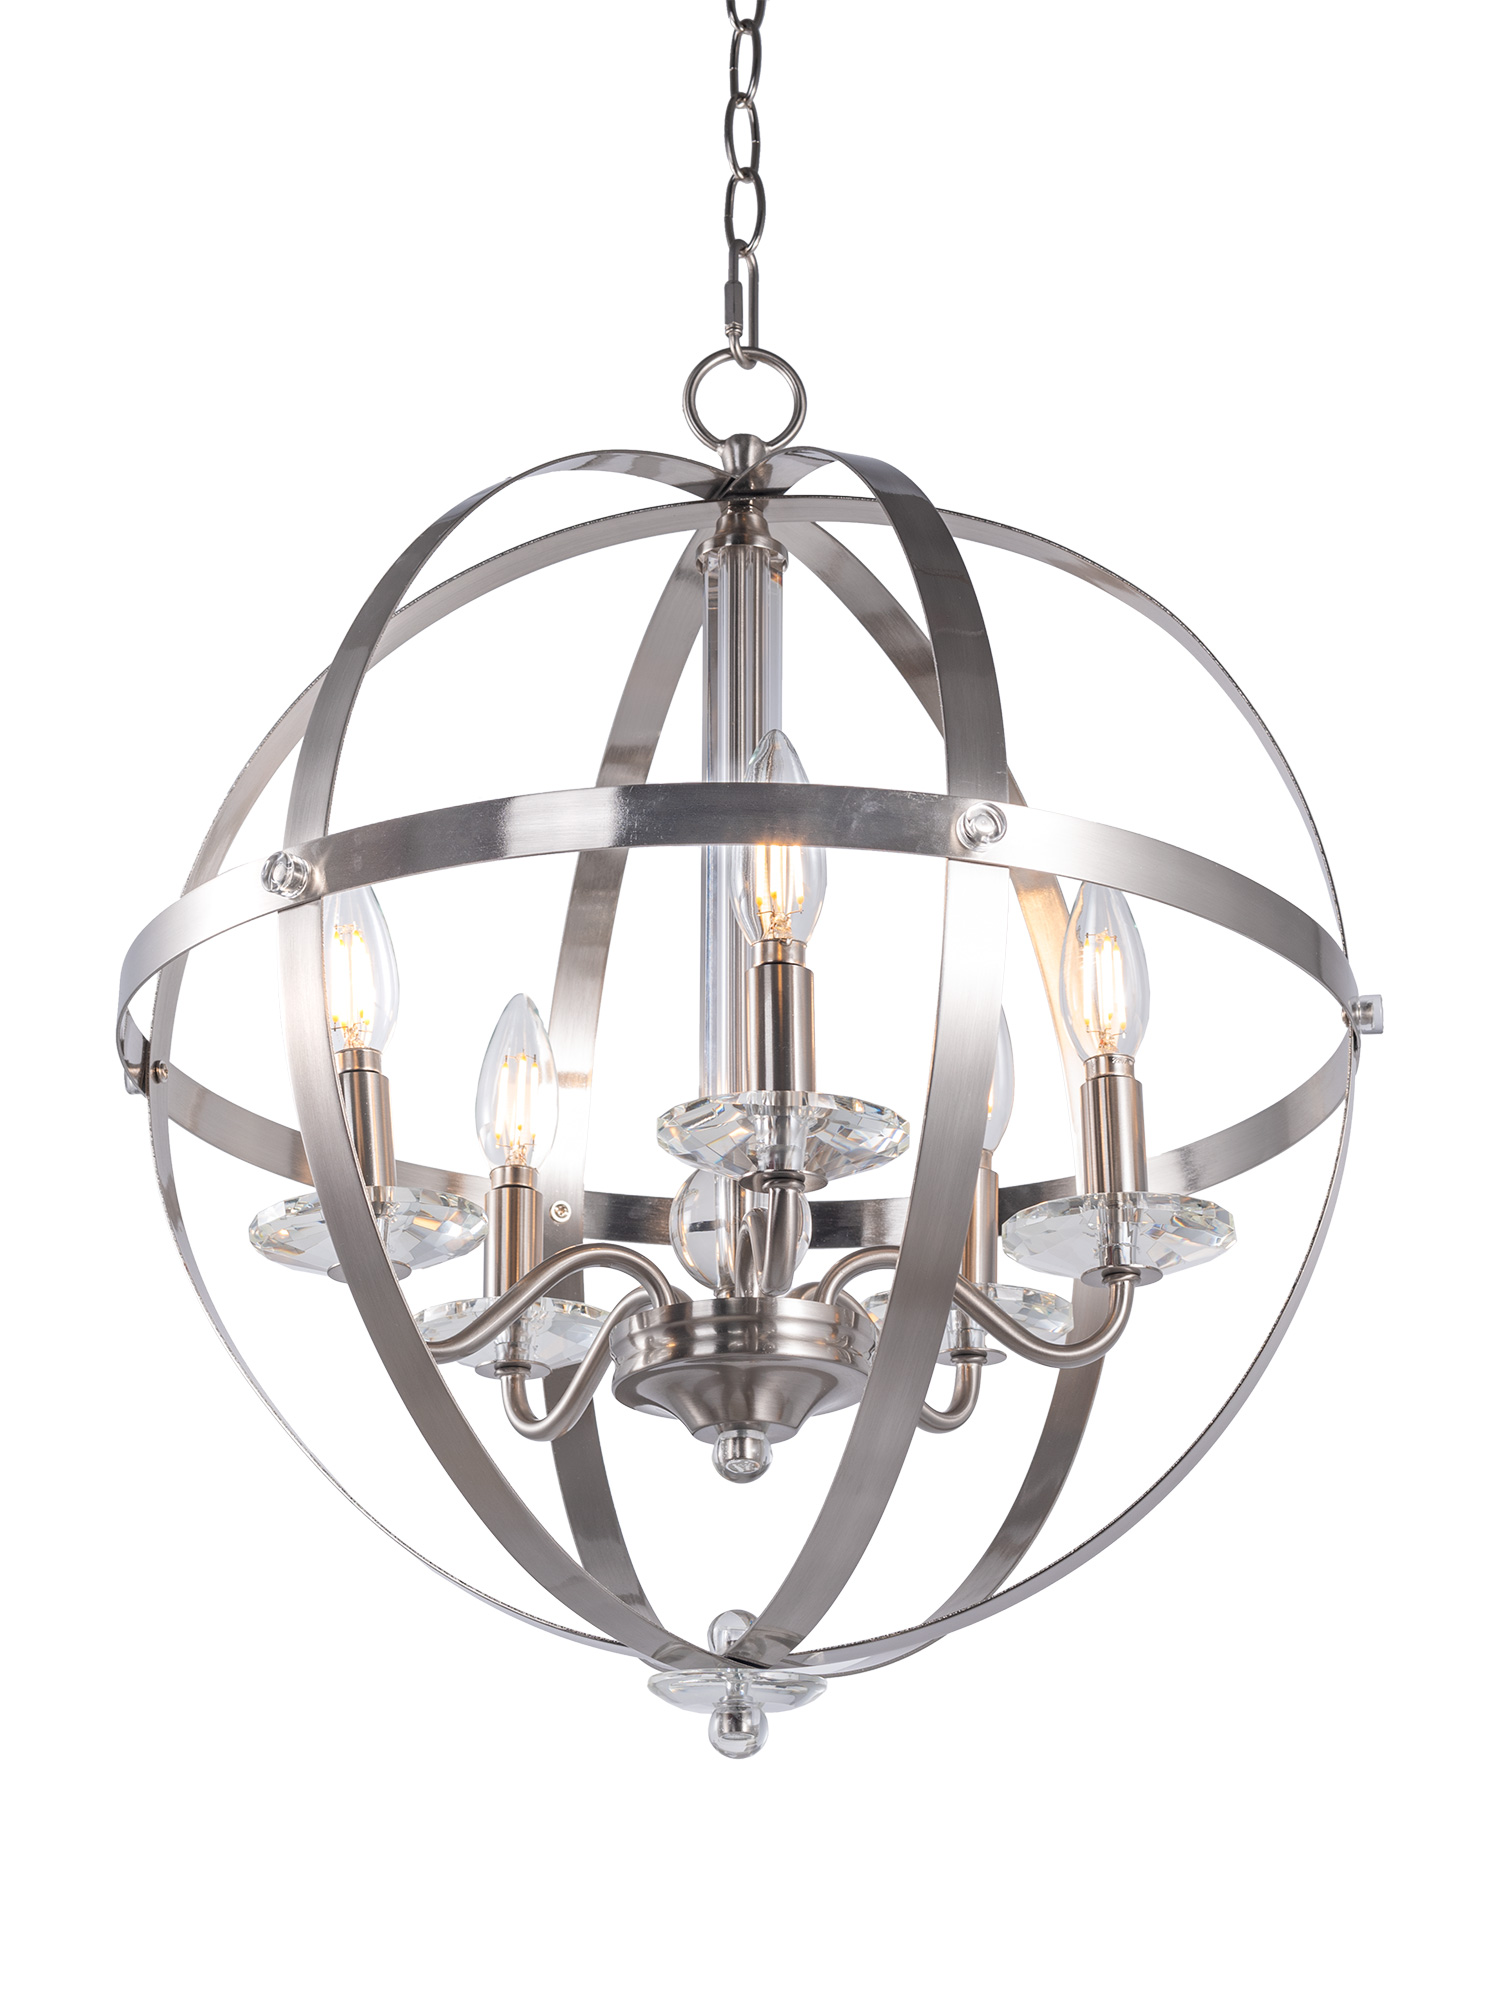 USA-Direct-5-Light-Candle-Style-Globe-Chandelier-Industrial-Rustic-Indoor-Pendant-Light-Without-Bulb-1877125-6